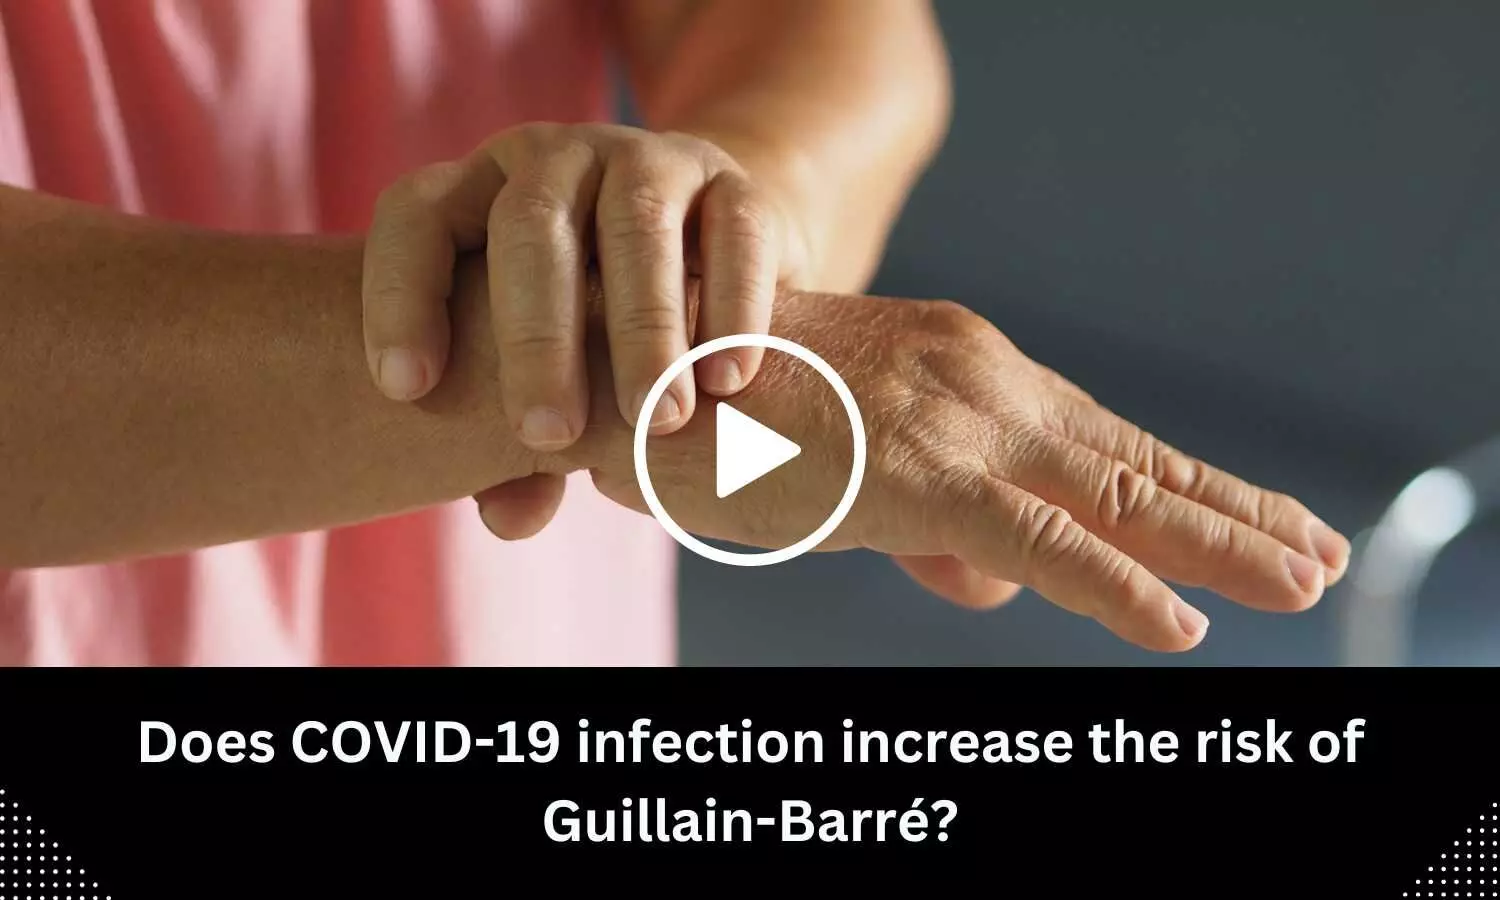 Does COVID-19 infection increase the risk of Guillain-Barré?